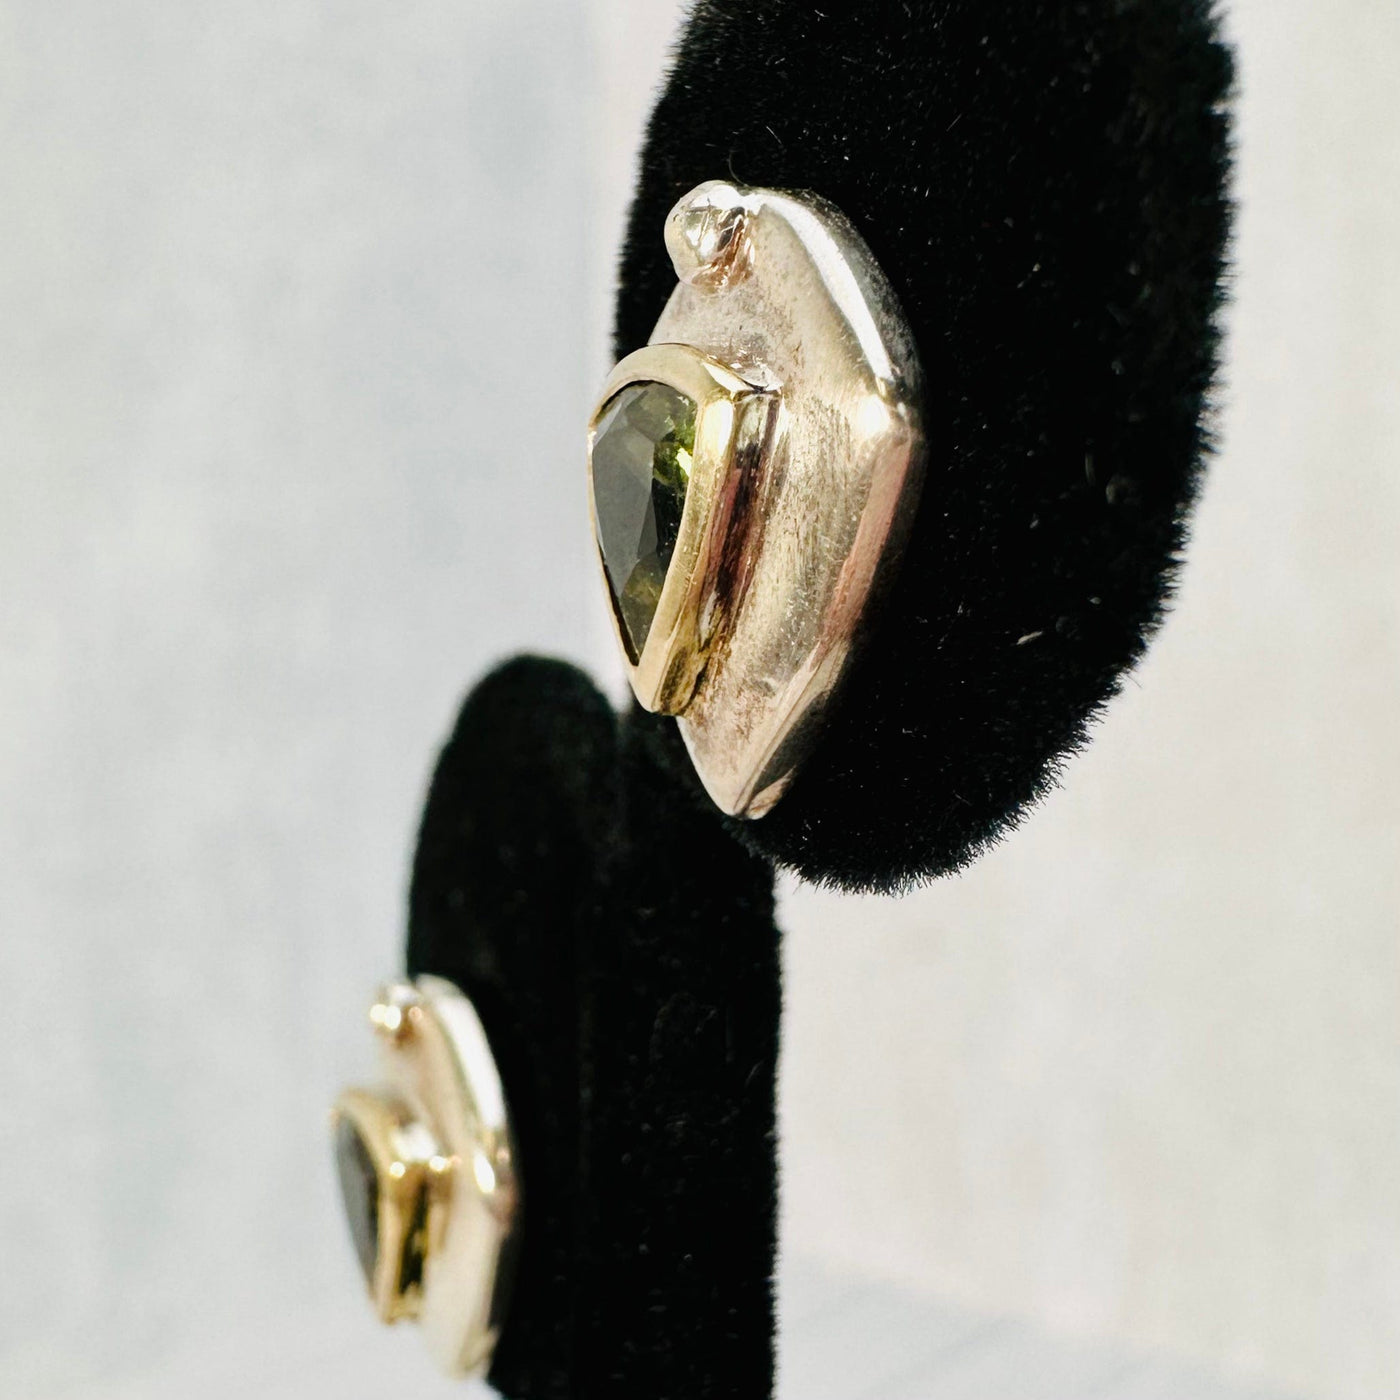 Up close side view of Moldavite earring on a black earring display.